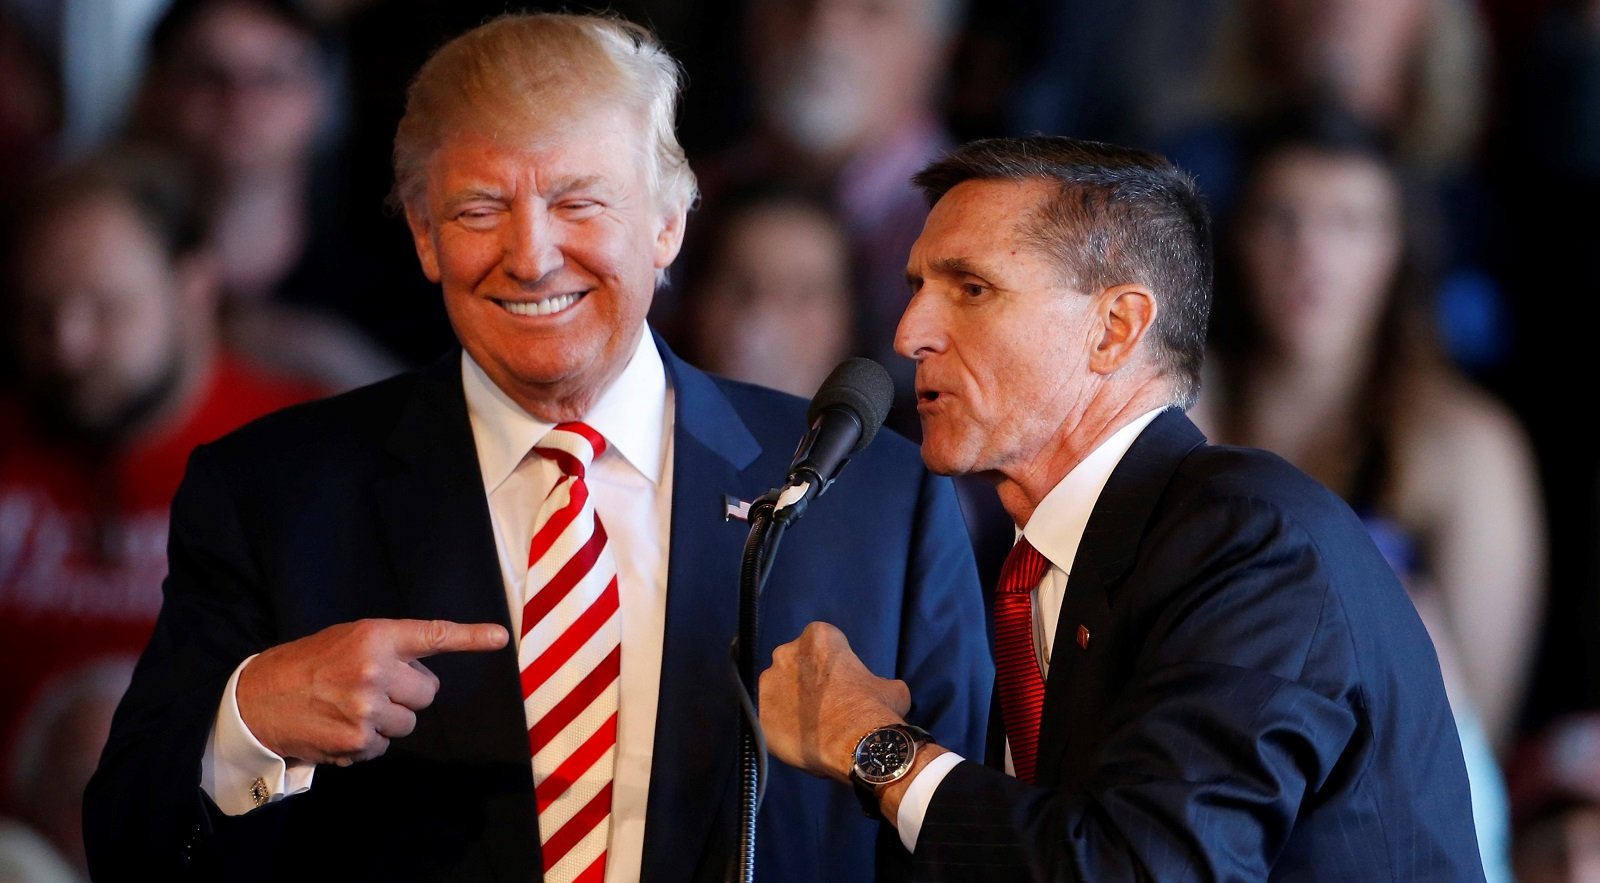 U.S. federal judge withdraws charges against Flynn for "collusion with Russia" Trump thanksaFour days before the inauguration of the new president, the sports car that used to belong to Trump will be auctioned again.